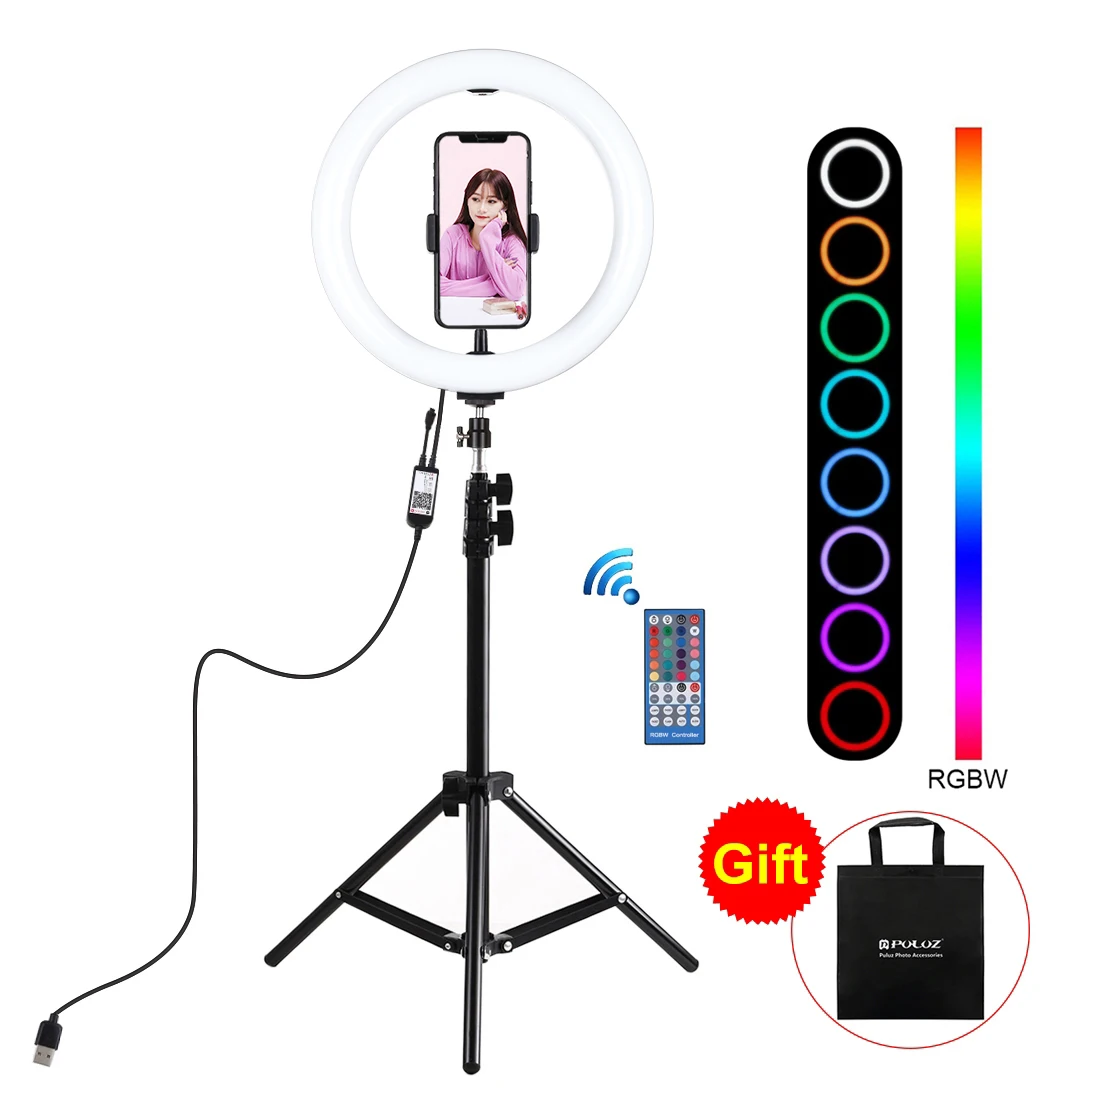 

PULUZ 10 inch 26cm RGBW LED Selfie Ring Light Video Vlogging &Tripod Stand Live Broadcast Kits with Remote Control & Phone Clamp